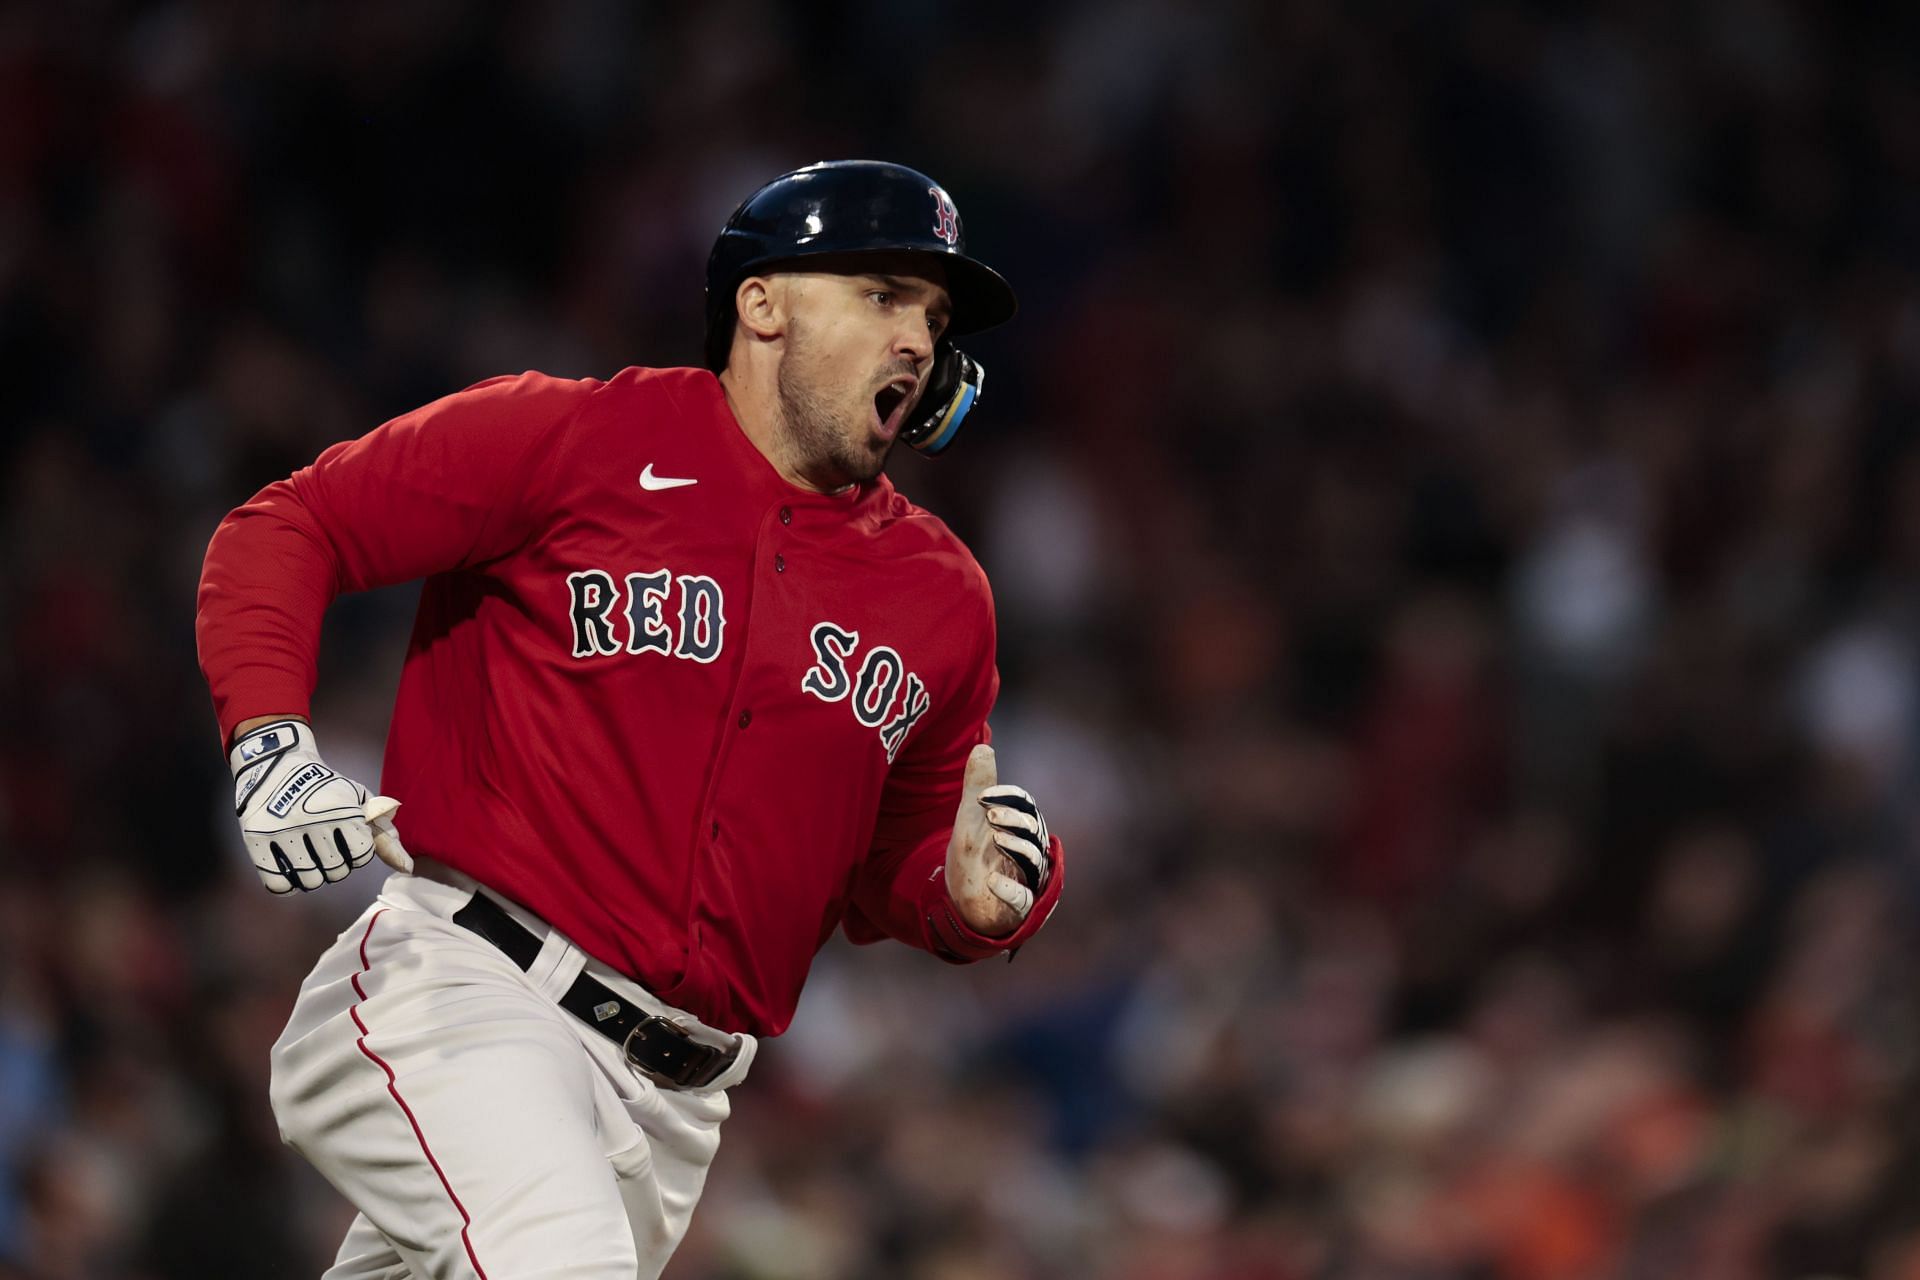 Baltimore Orioles v Boston Red Sox: BOSTON, MASSACHUSETTS - APRIL 01: Adam of the Boston Red Sox reacts after hitting a walk-off home run during the ninth inning against the Baltimore Orioles at Fenway Park on April 01, 2023, in Boston, Massachusetts. (Photo by Nick Grace/Getty Images)